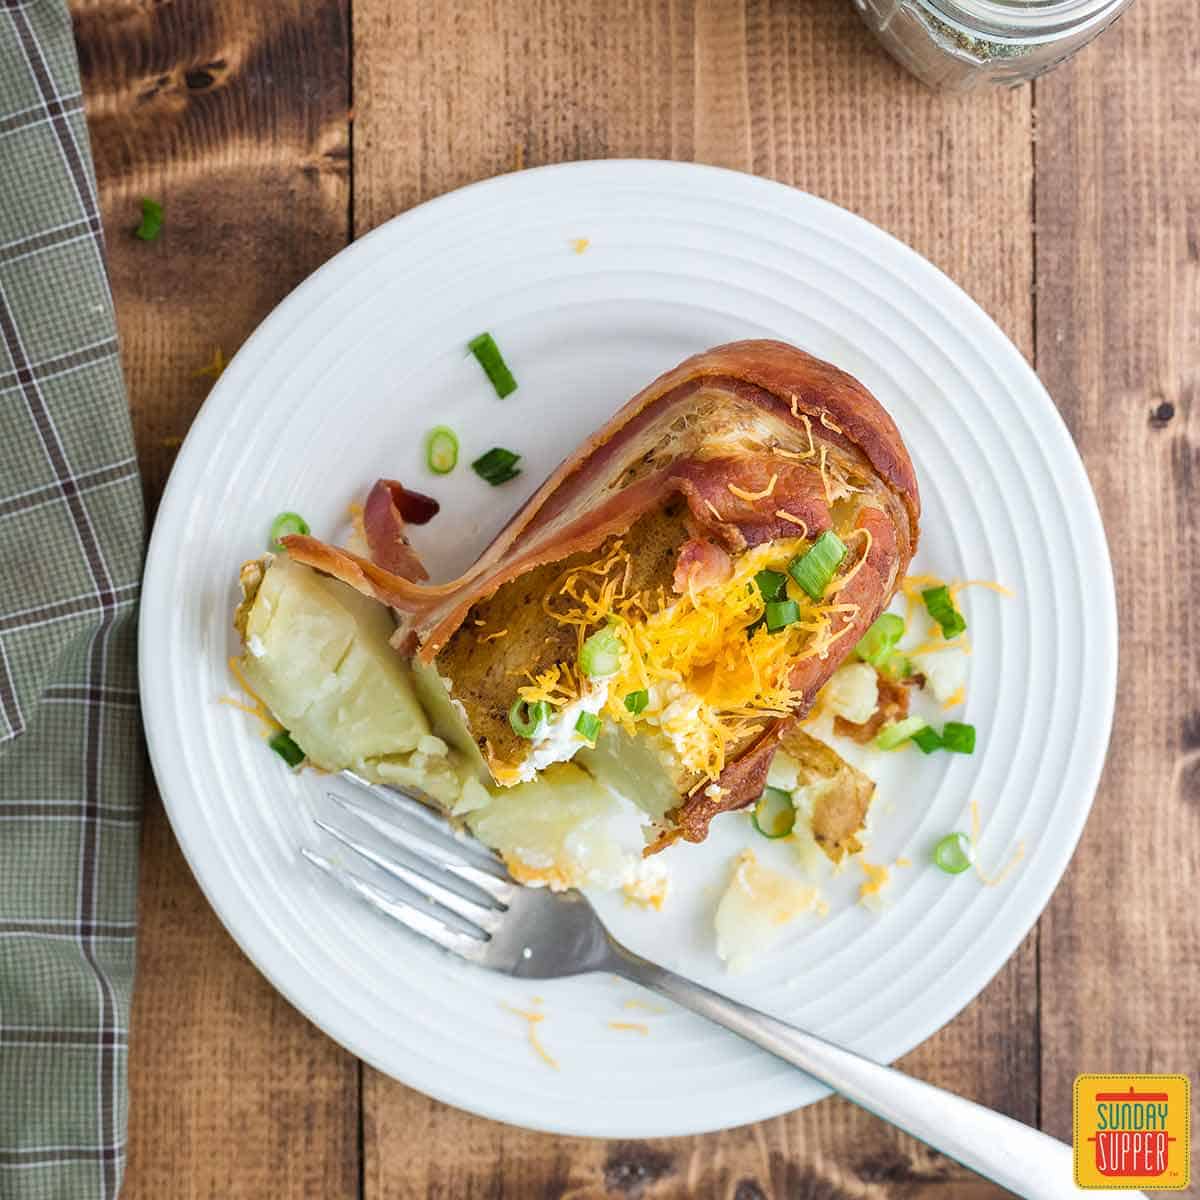 A bacon-wrapped potato on a white plate with a fork, split open and stuffed with cheese, sour cream, and green onions